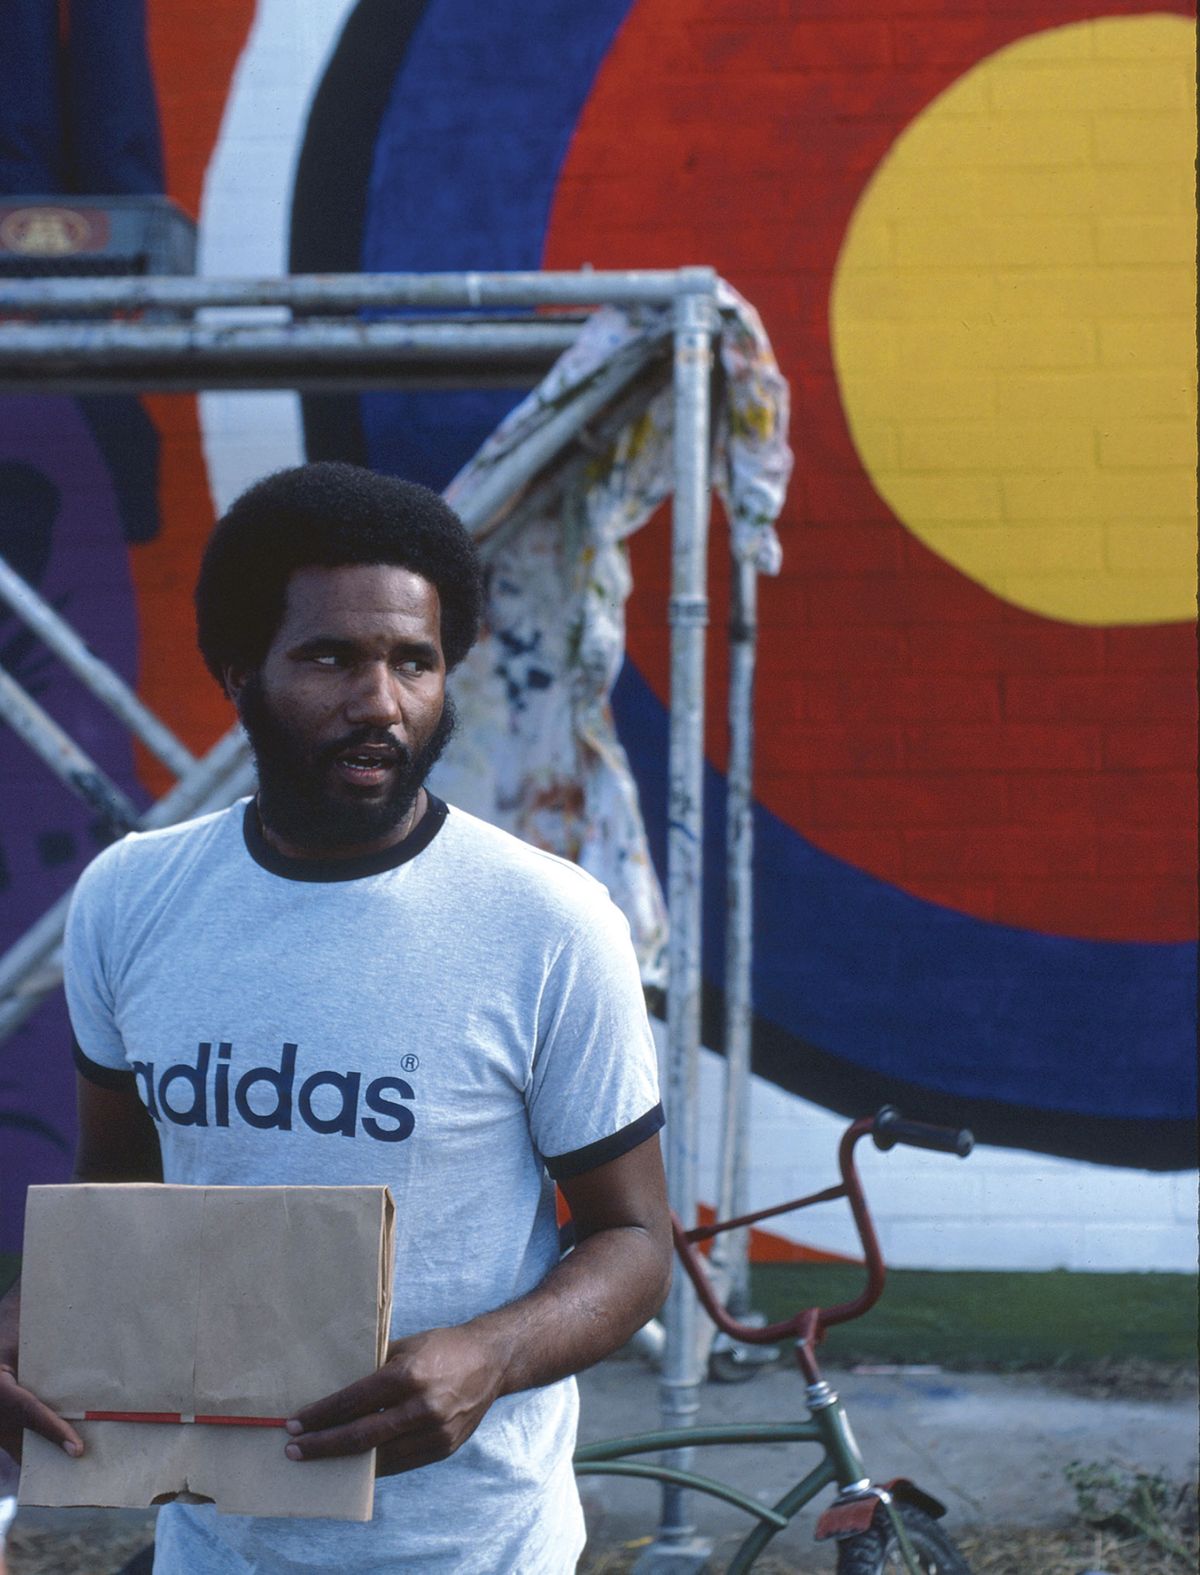 Ulysses Jenkins’s Centinela Valley Juvenile Diversion Mural Project documentation (1976) Courtesy of the artist and The Hammer Museum